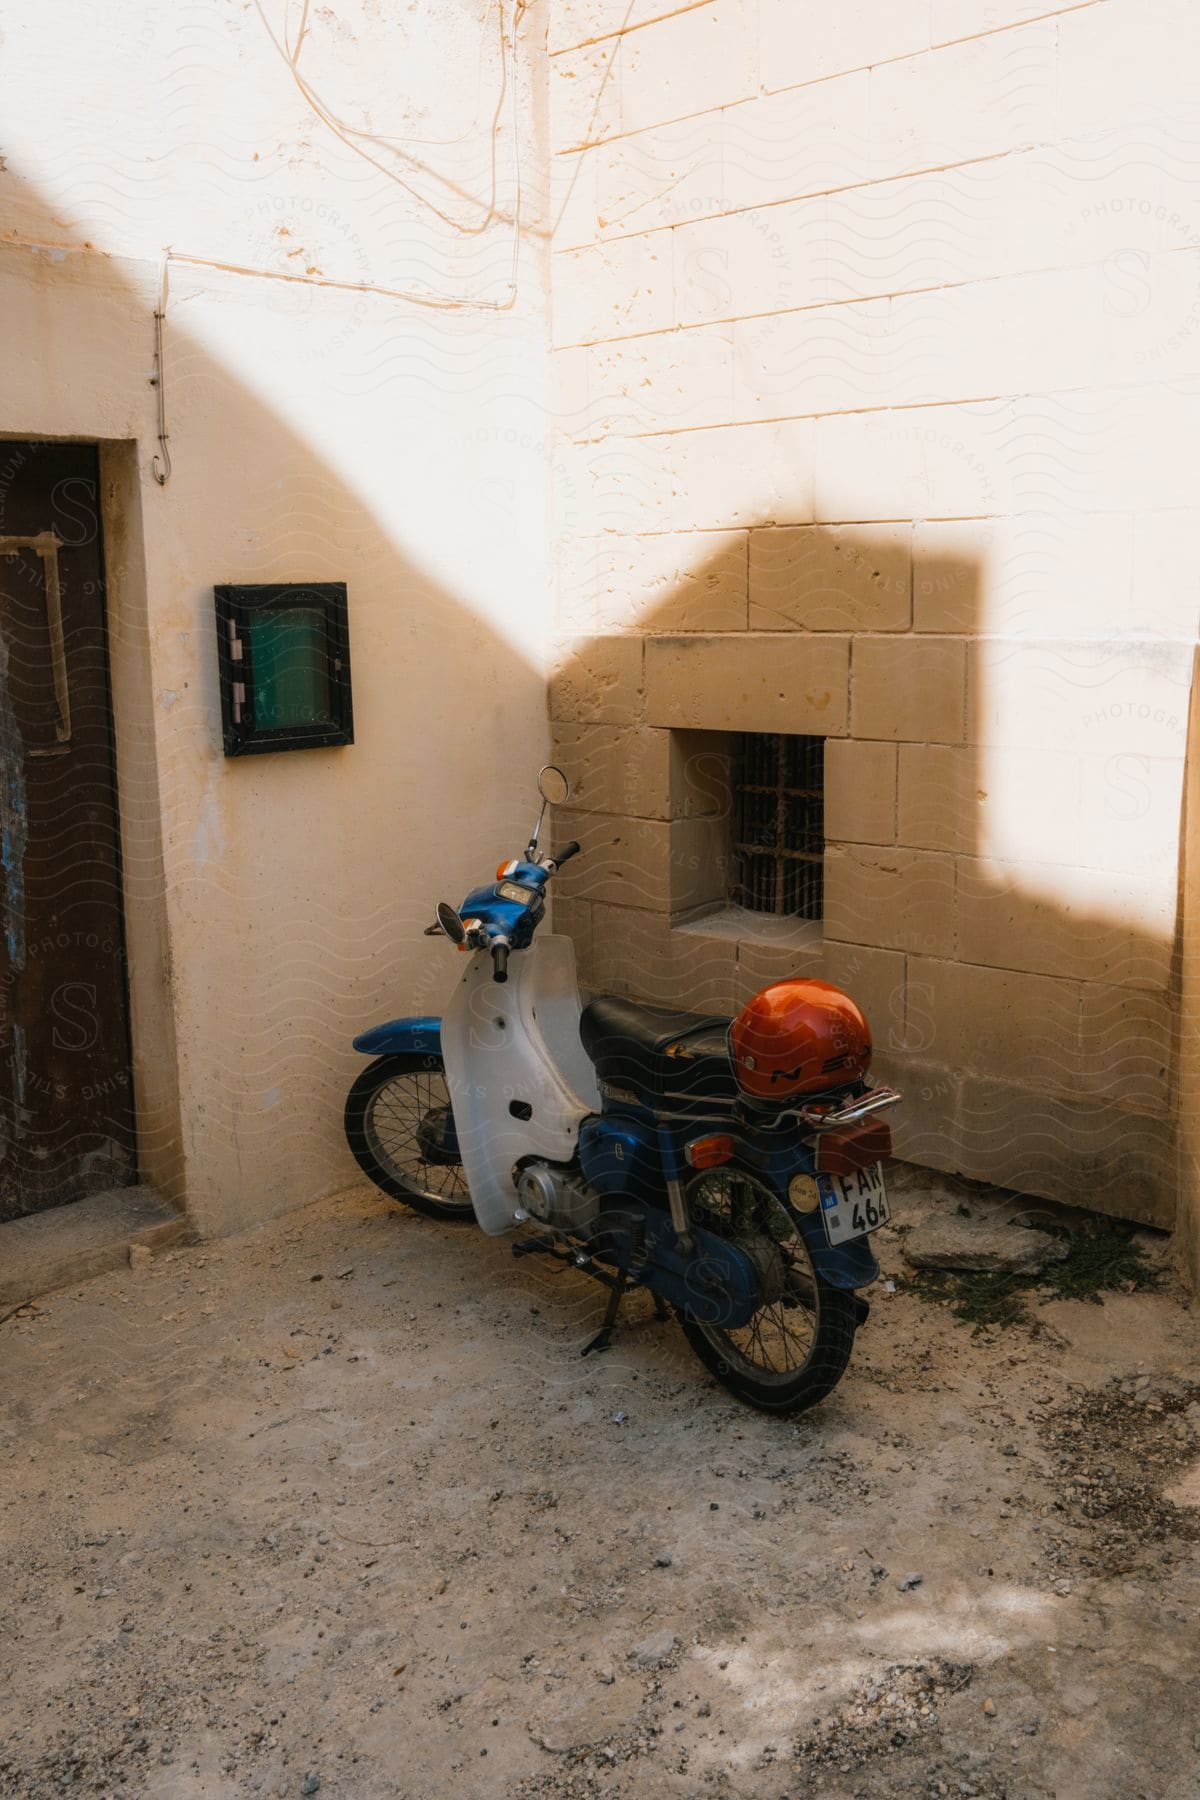 A Vespa scooter stands near a wall and door of a building